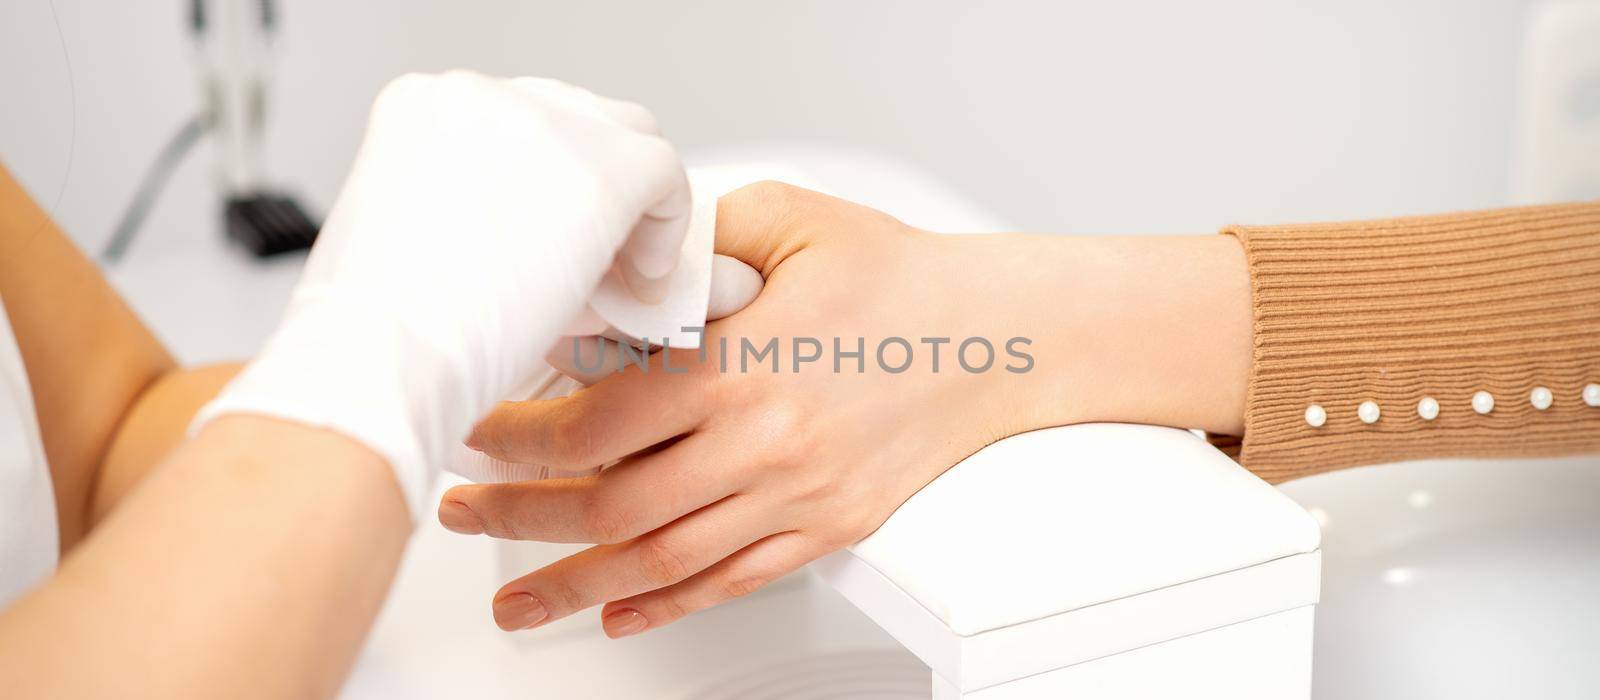 Hands of a manicurist in white protective gloves wipe female nails with a paper napkin in the salon